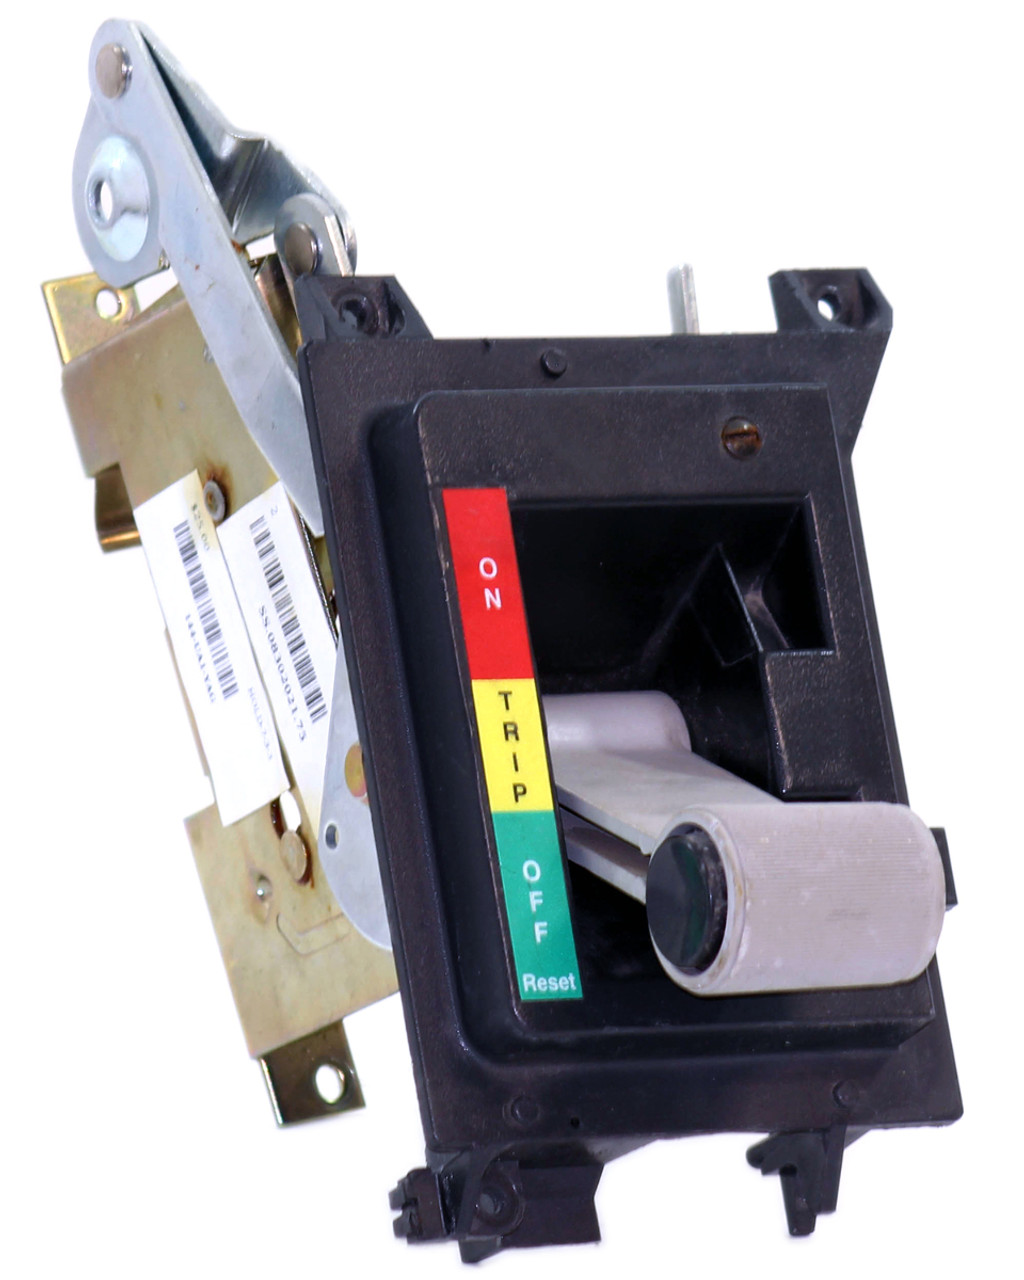 Westinghouse 144 On/Trip/Off Circuit Breaker Switch Operator Handle